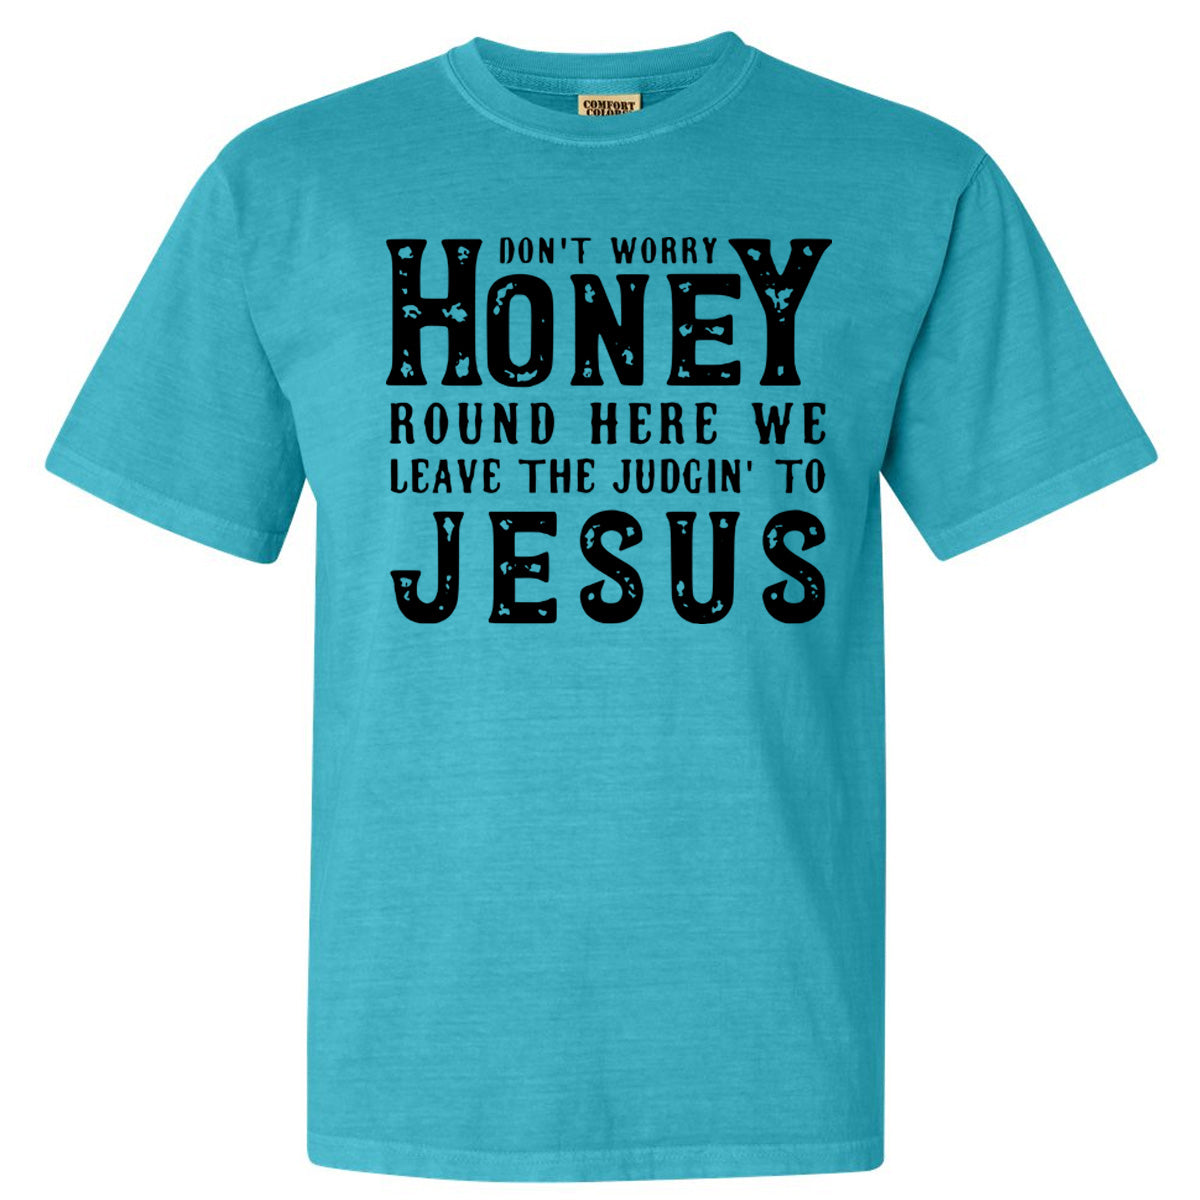 Don't Worry Honey Round Here We Leave The Judgin' To Jesus - Comfort Color Tee - Lagoon (Tee/Sweatshirt) - Southern Grace Creations